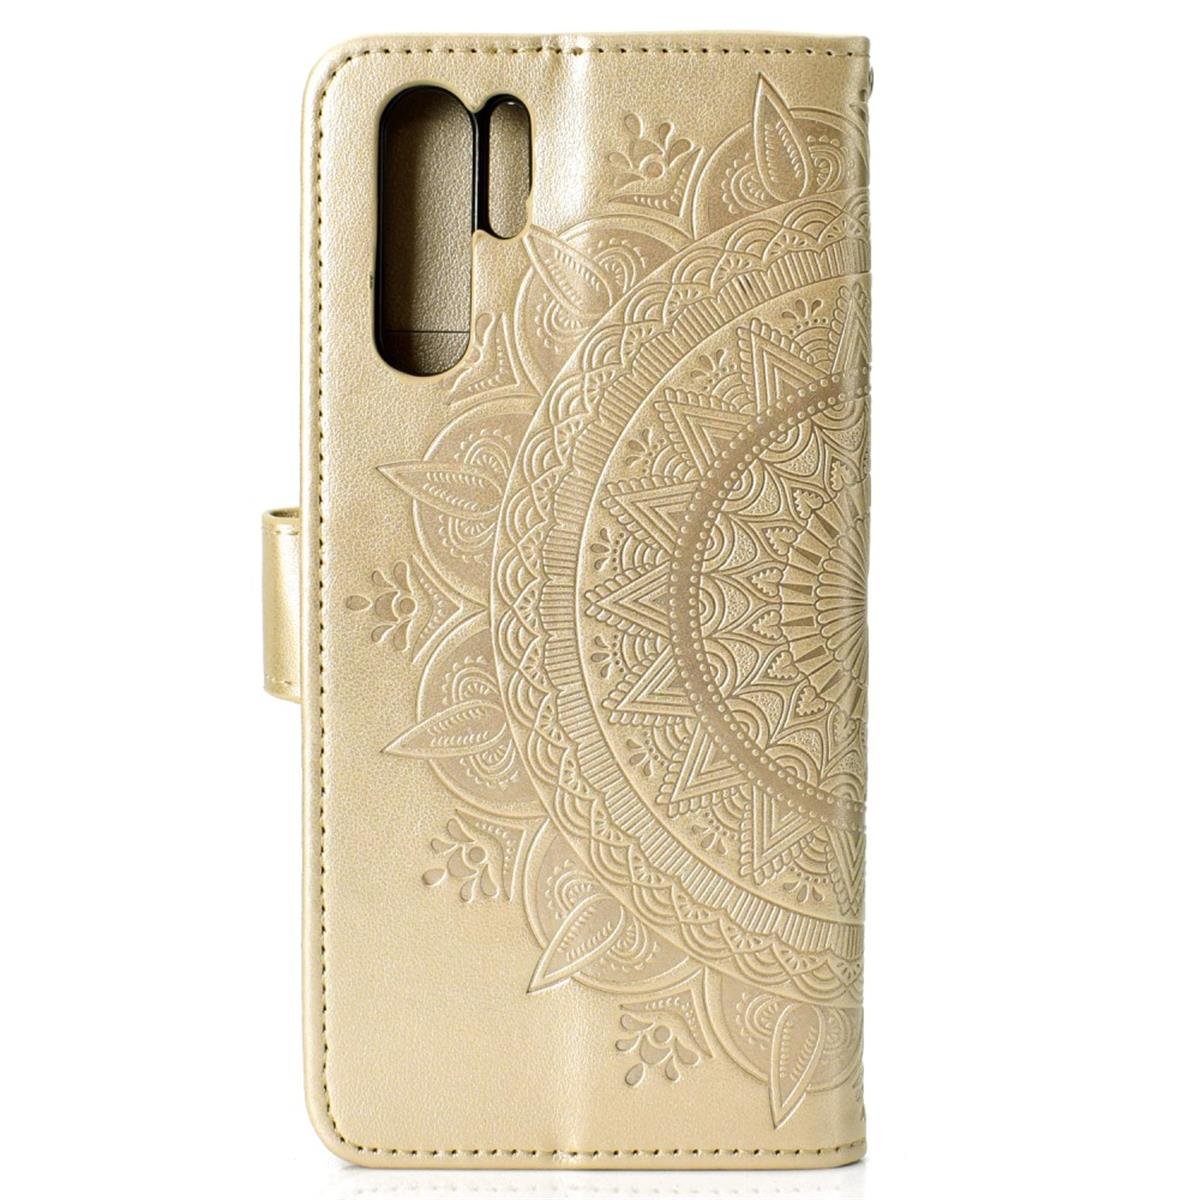 Pro, P30 COVERKINGZ Bookcover, Huawei, mit Muster, Gold Mandala Klapphülle